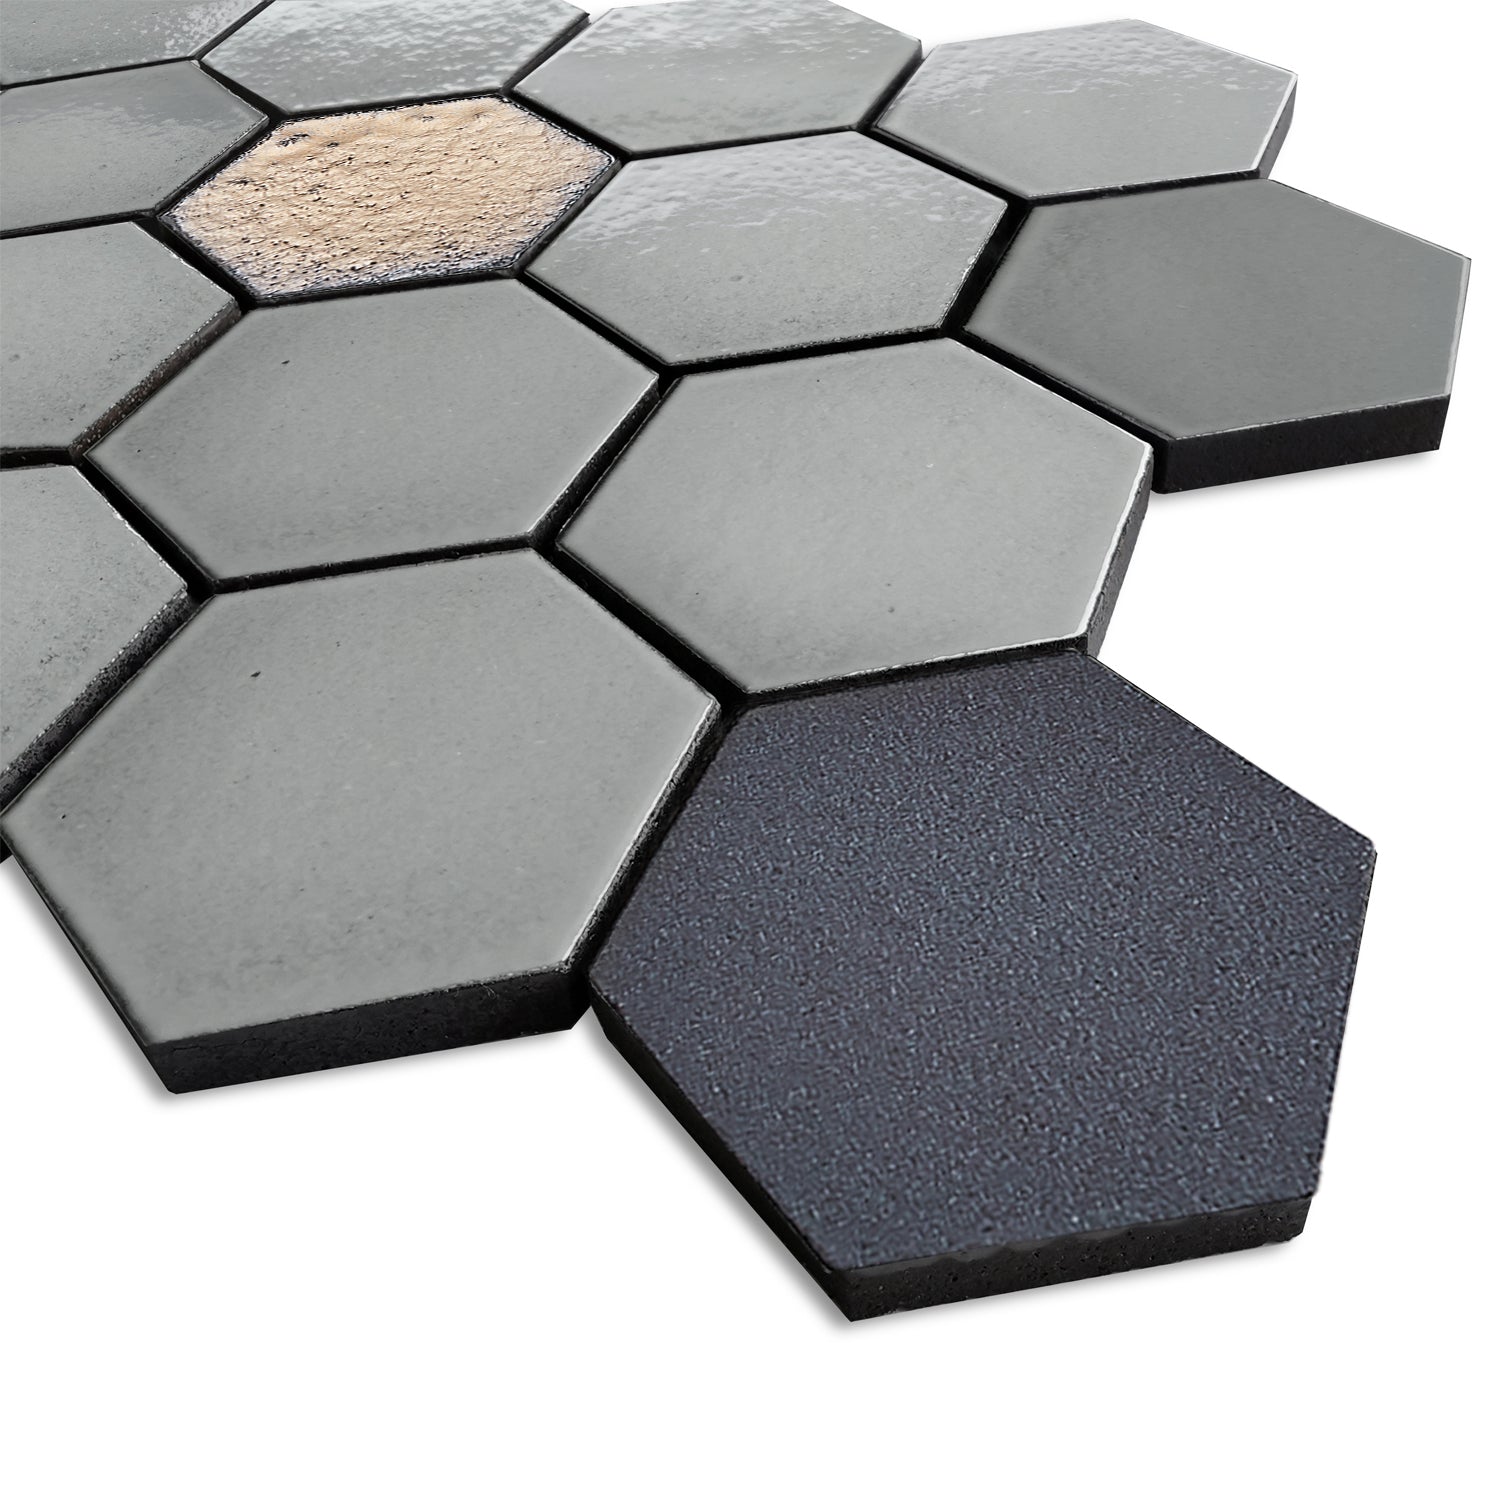 Lugo Lava Stone Mosaic Floor and Wall Tile in Grey